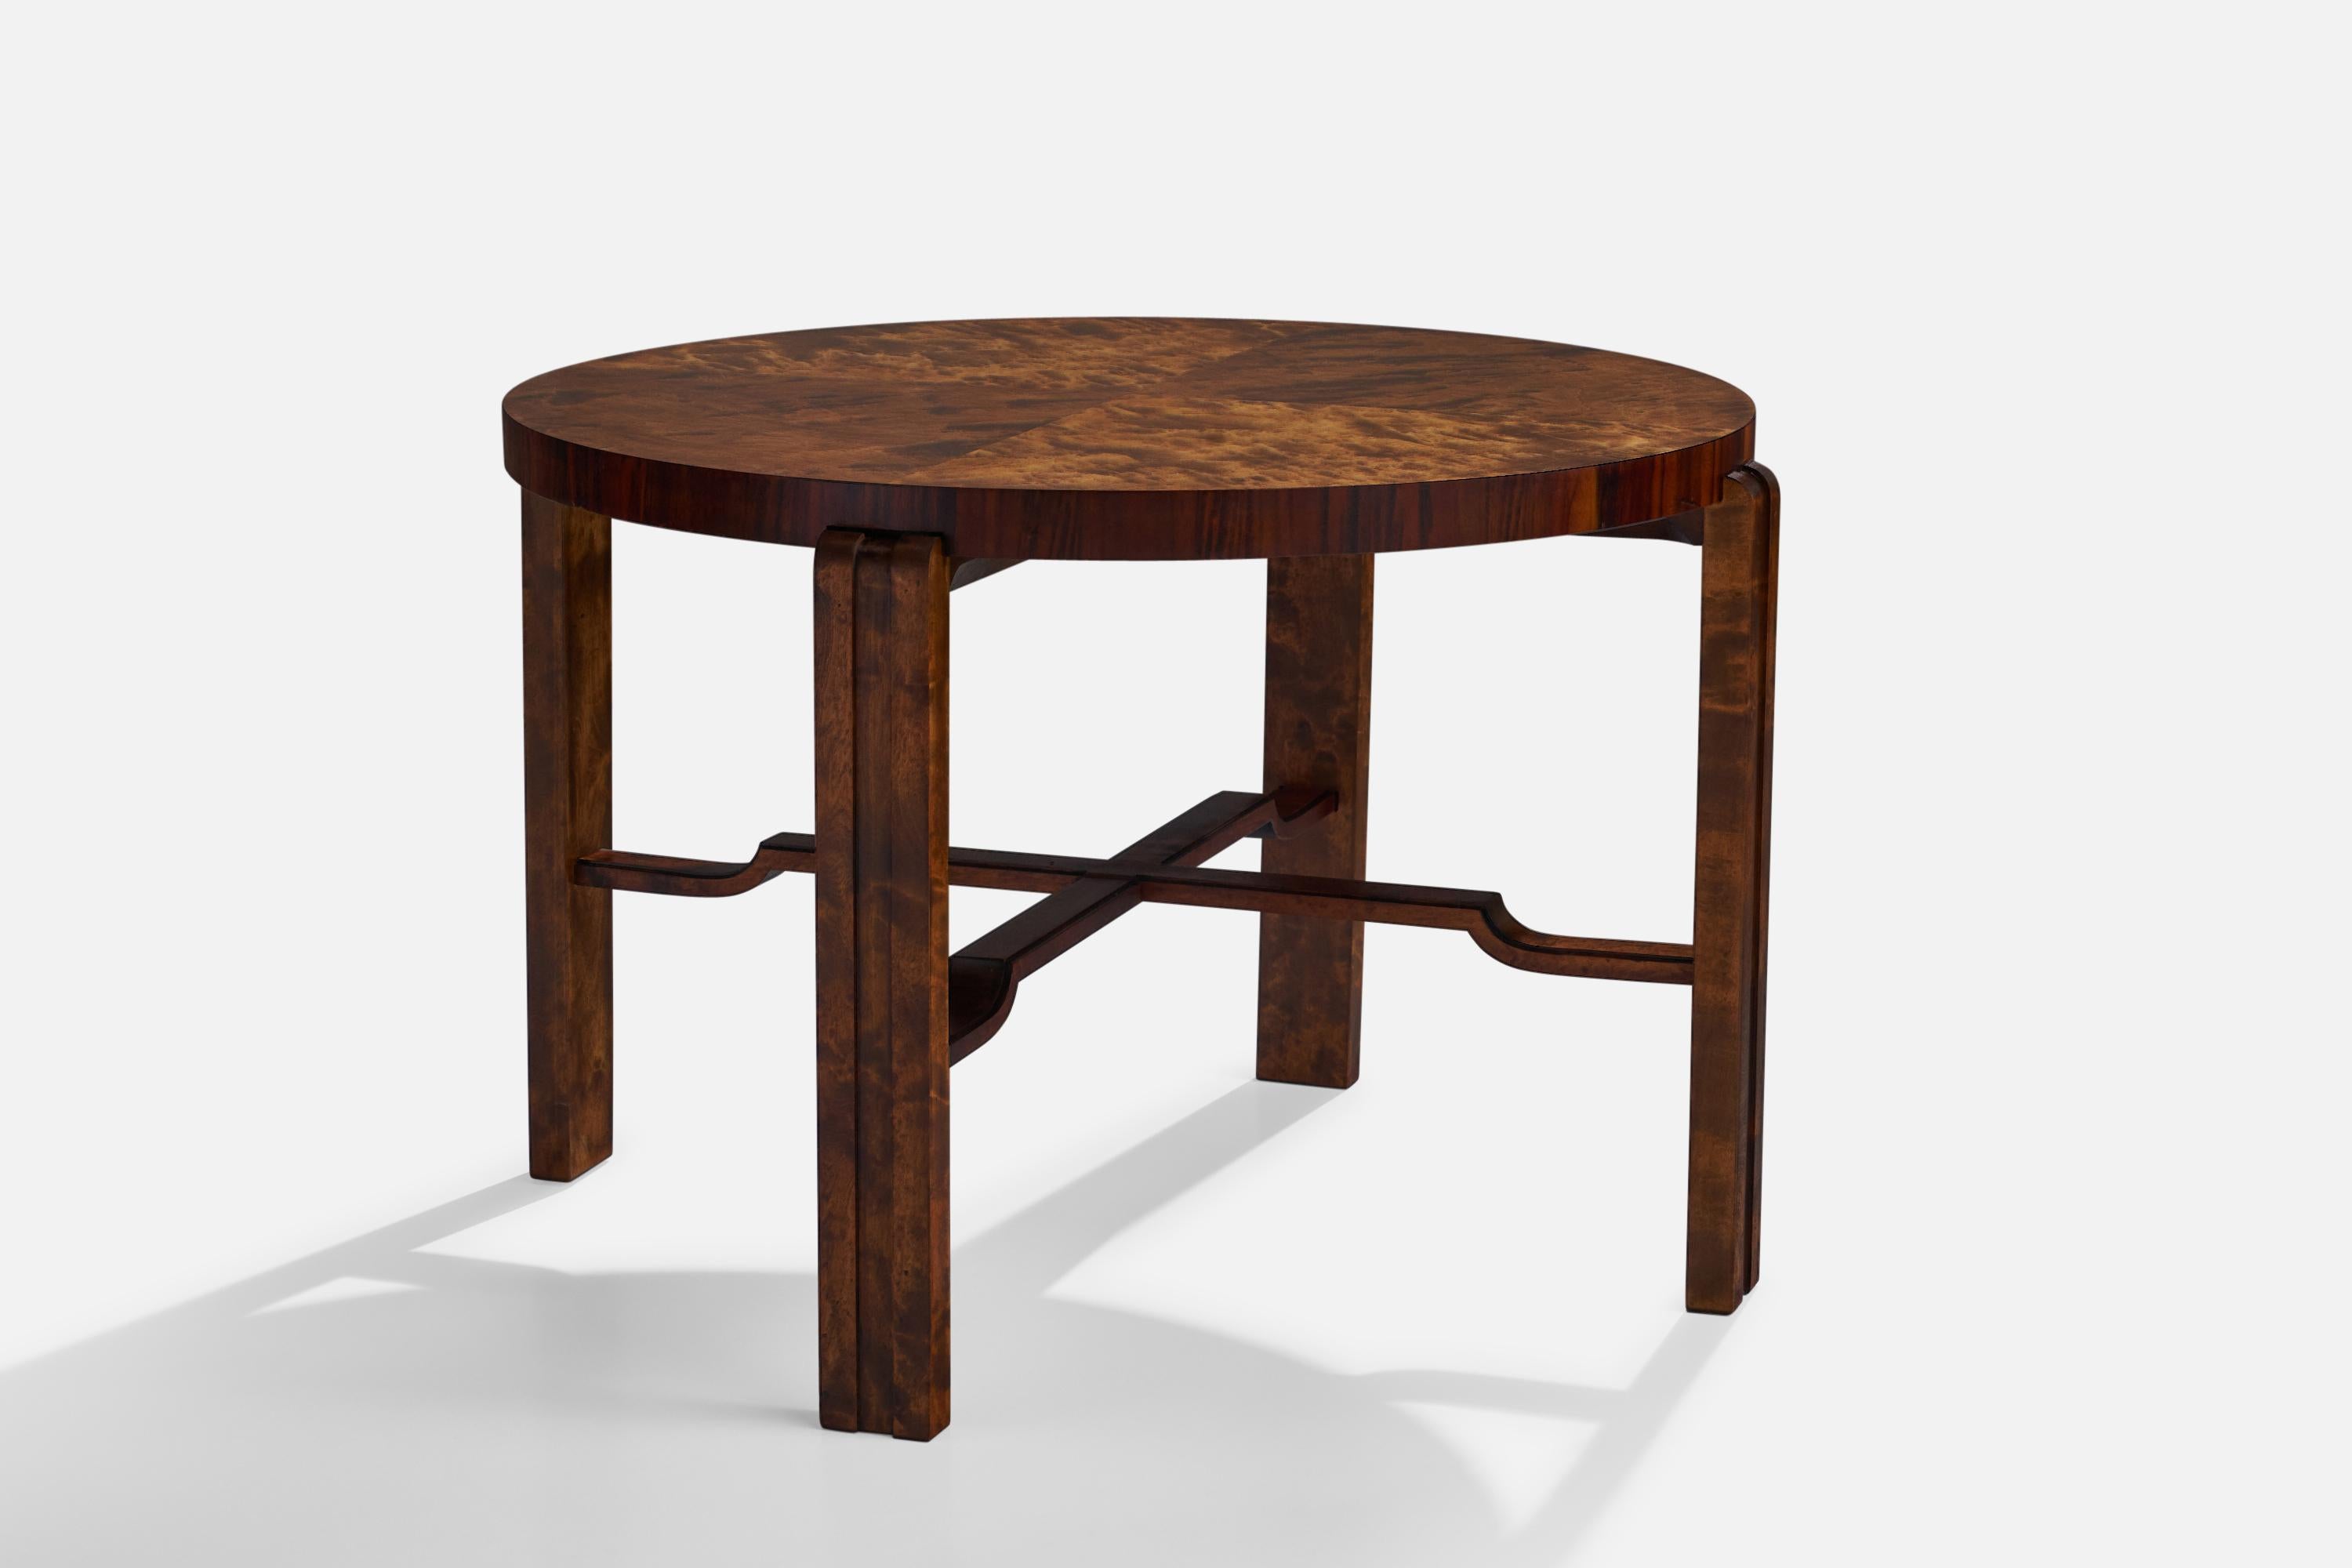 A dark-stained birch side table designed and produced in Sweden, c. 1930s.